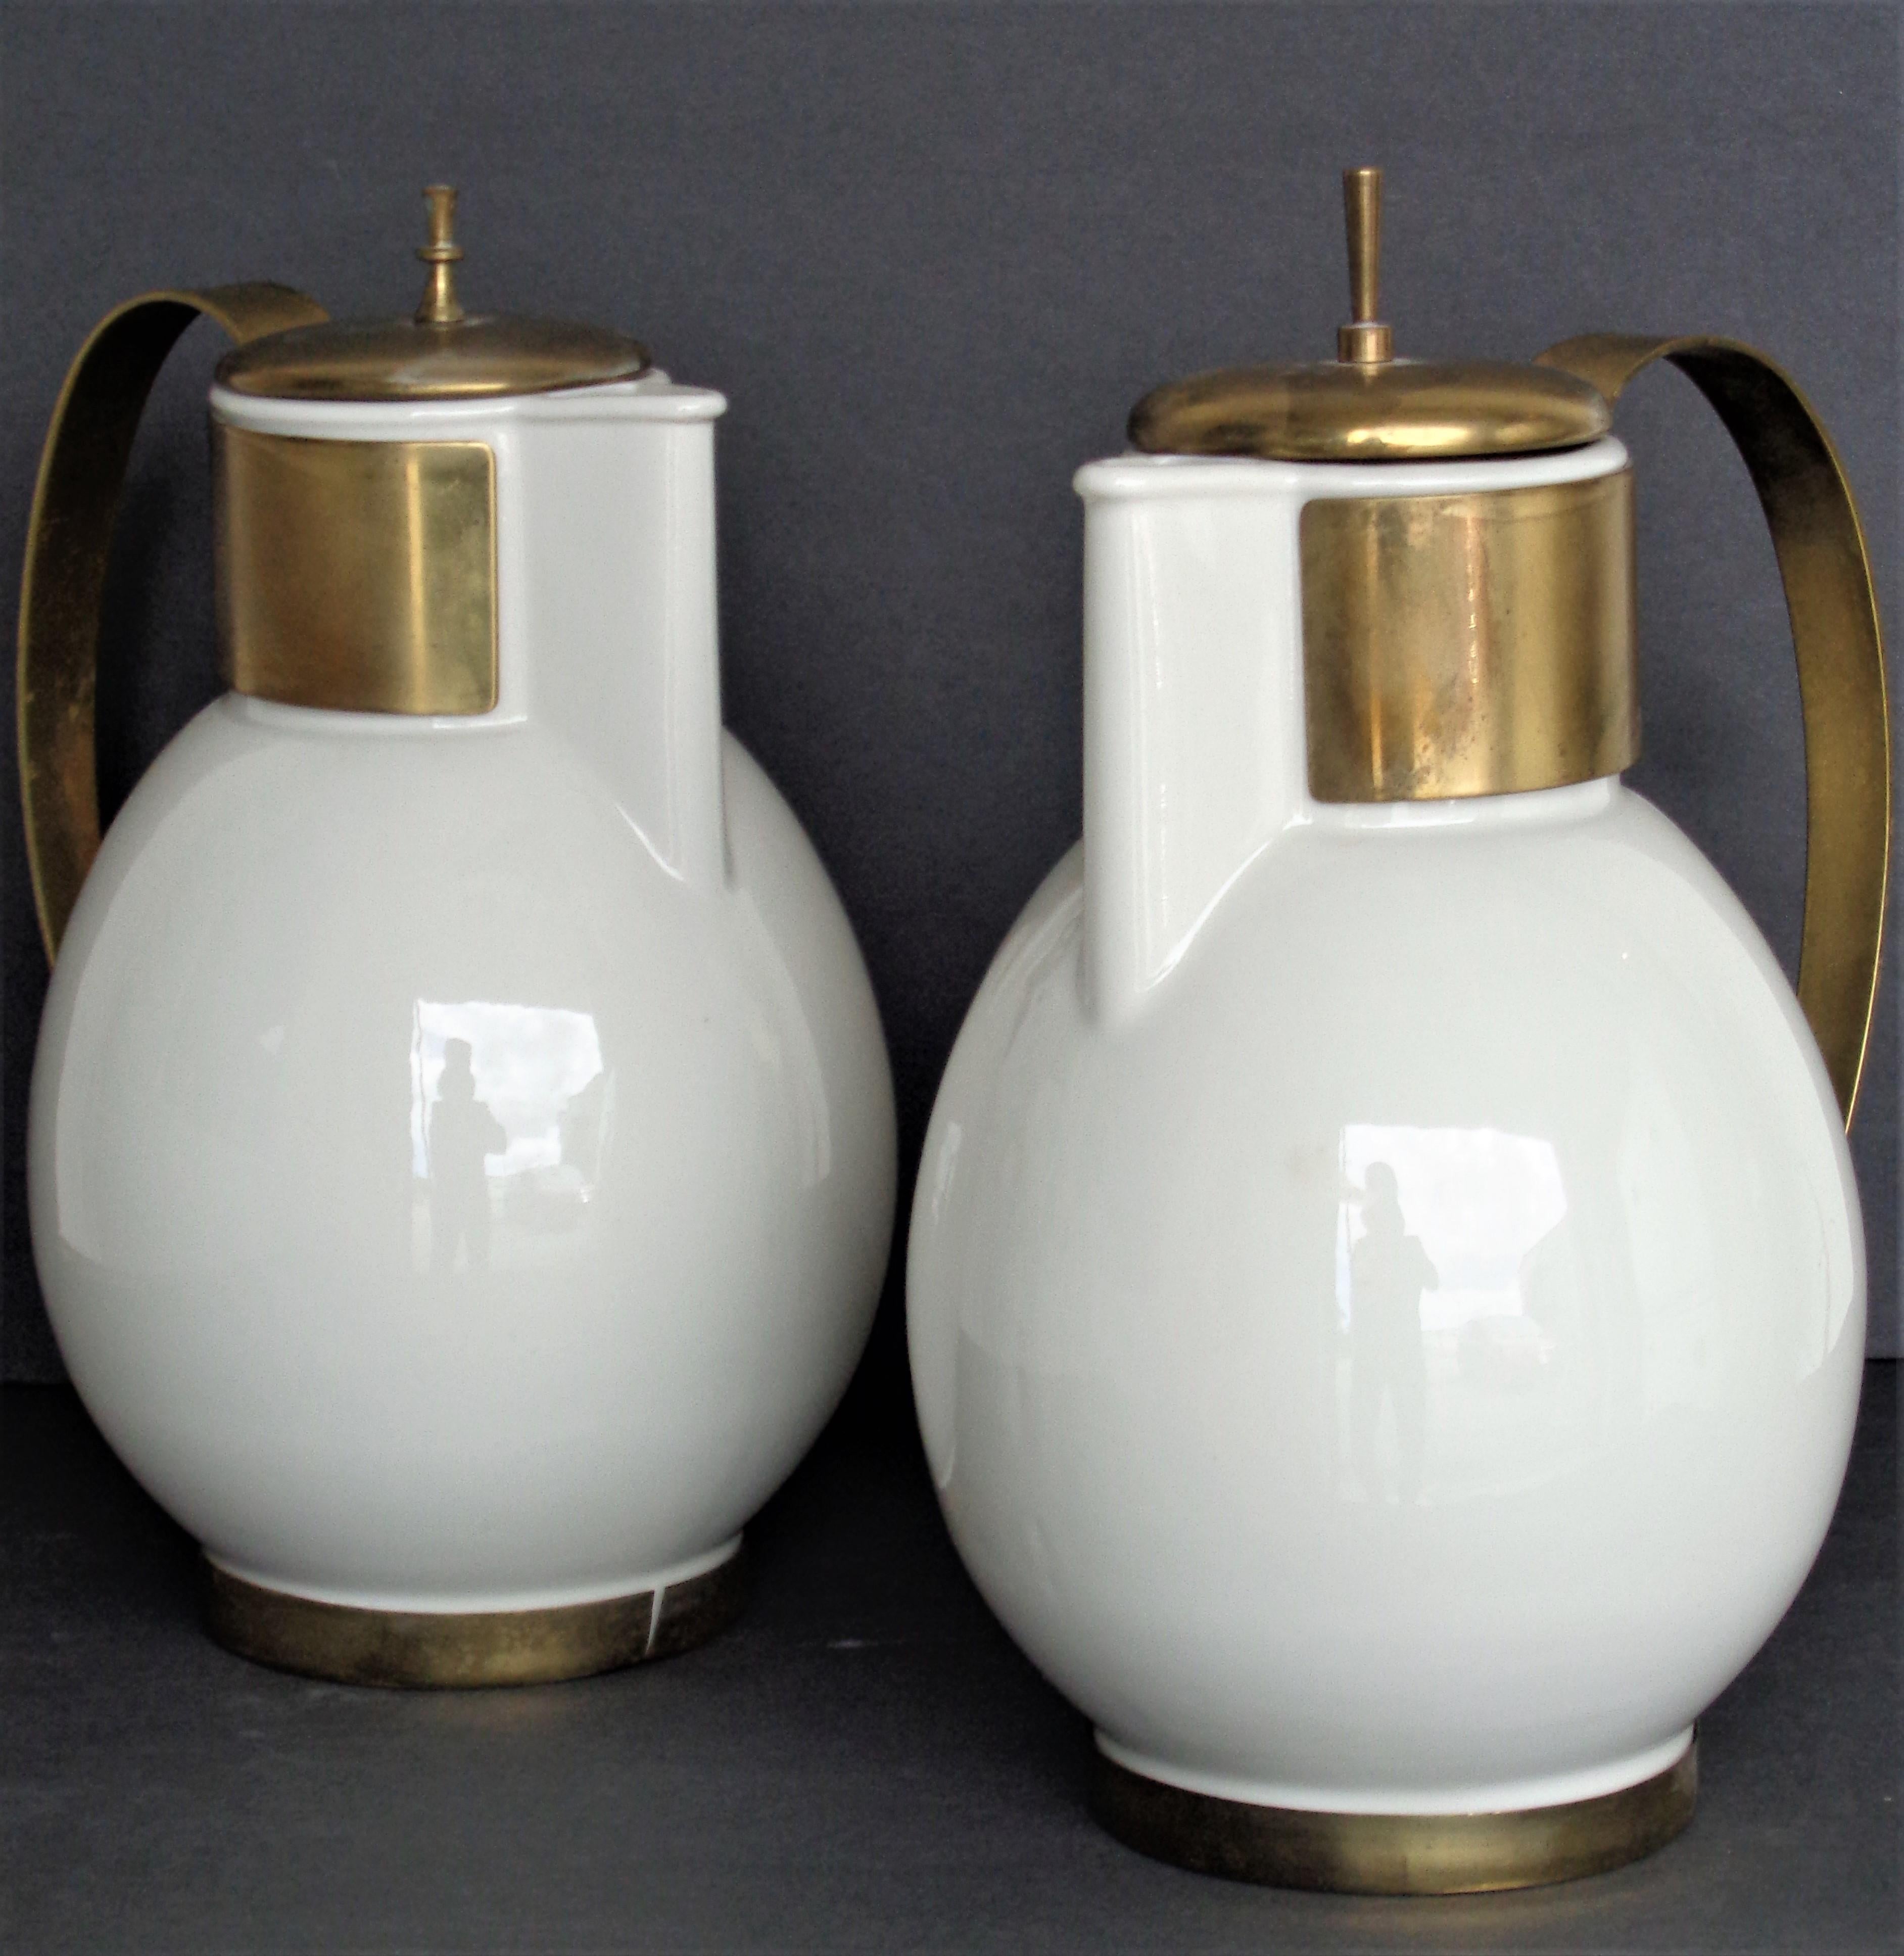 A near pair of heavy white porcelain and brass fitted coffee servers by German born designer Ernest Sohn. Great looking Bauhaus inspired modernist serving pieces. Circa 1950. Look at all pictures and read condition report in comment section.